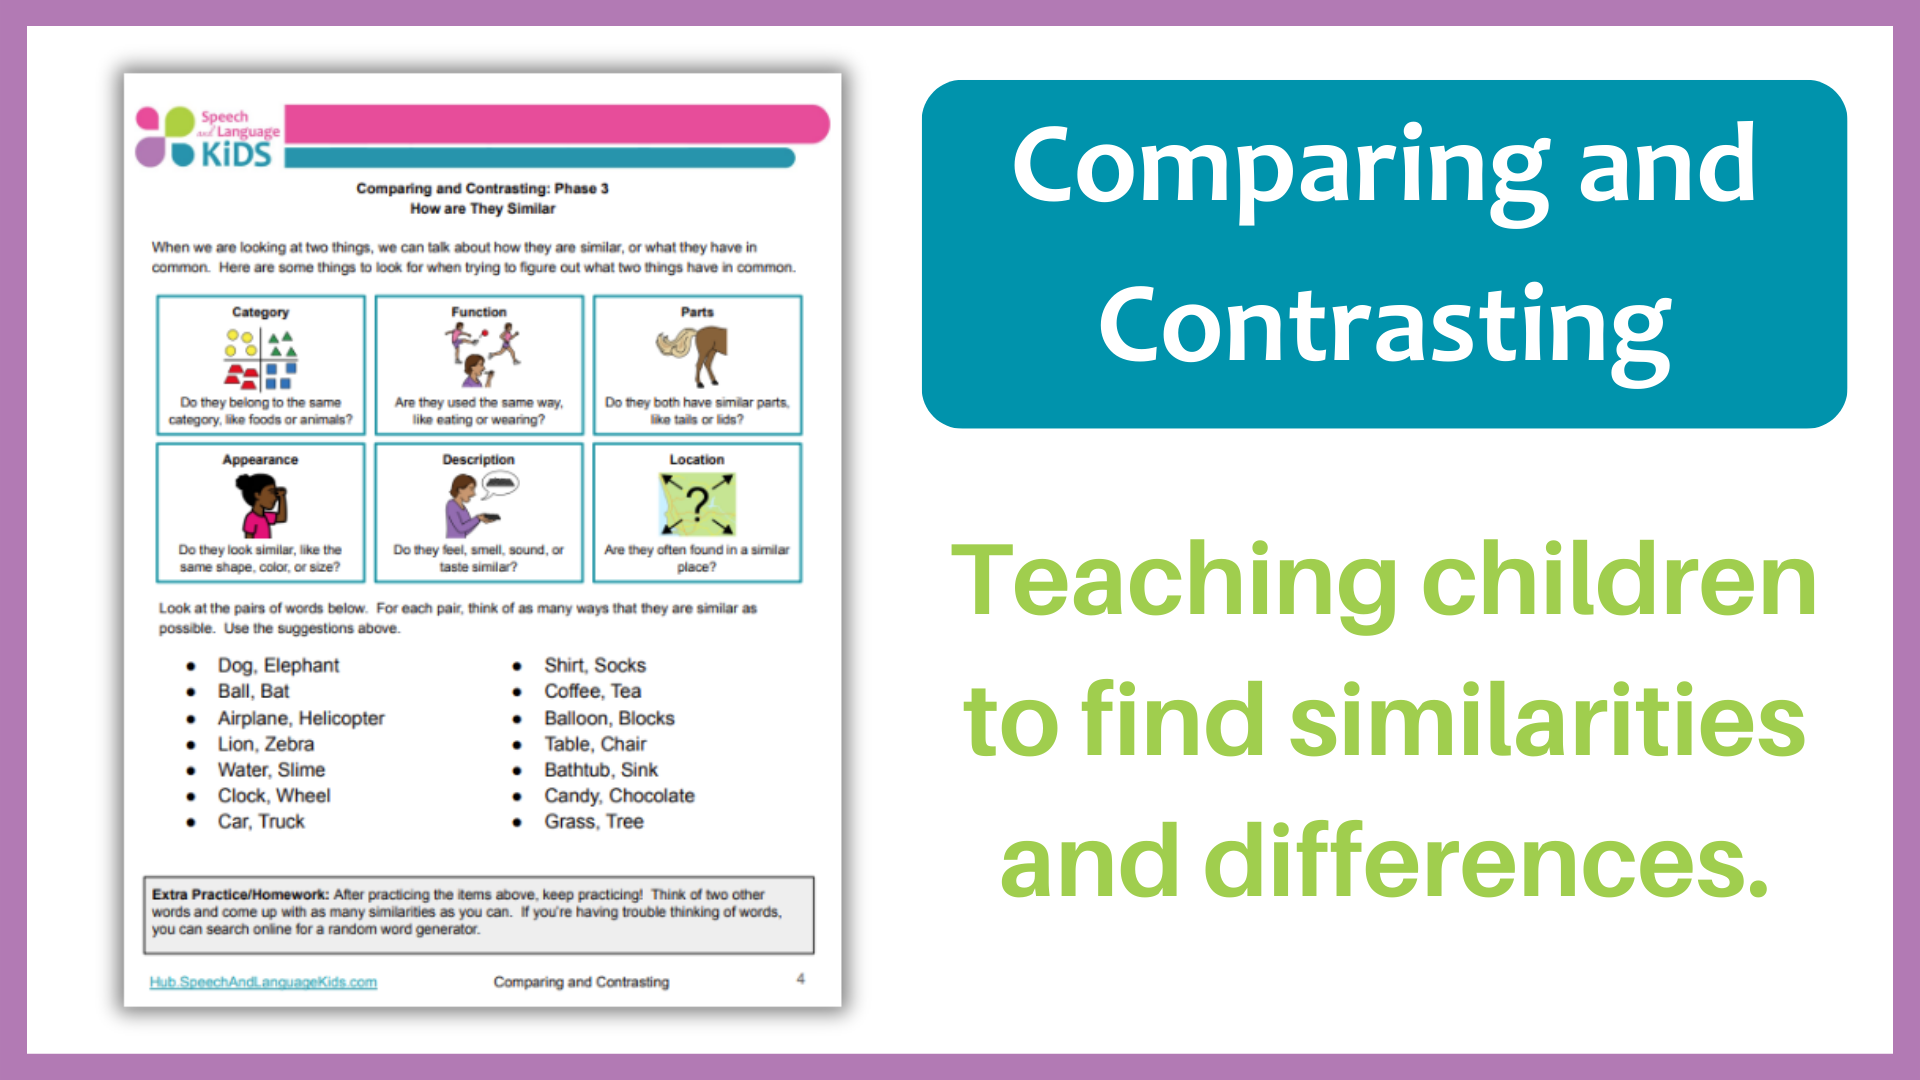 Teaching Comparing and Contrasting Skills to Children